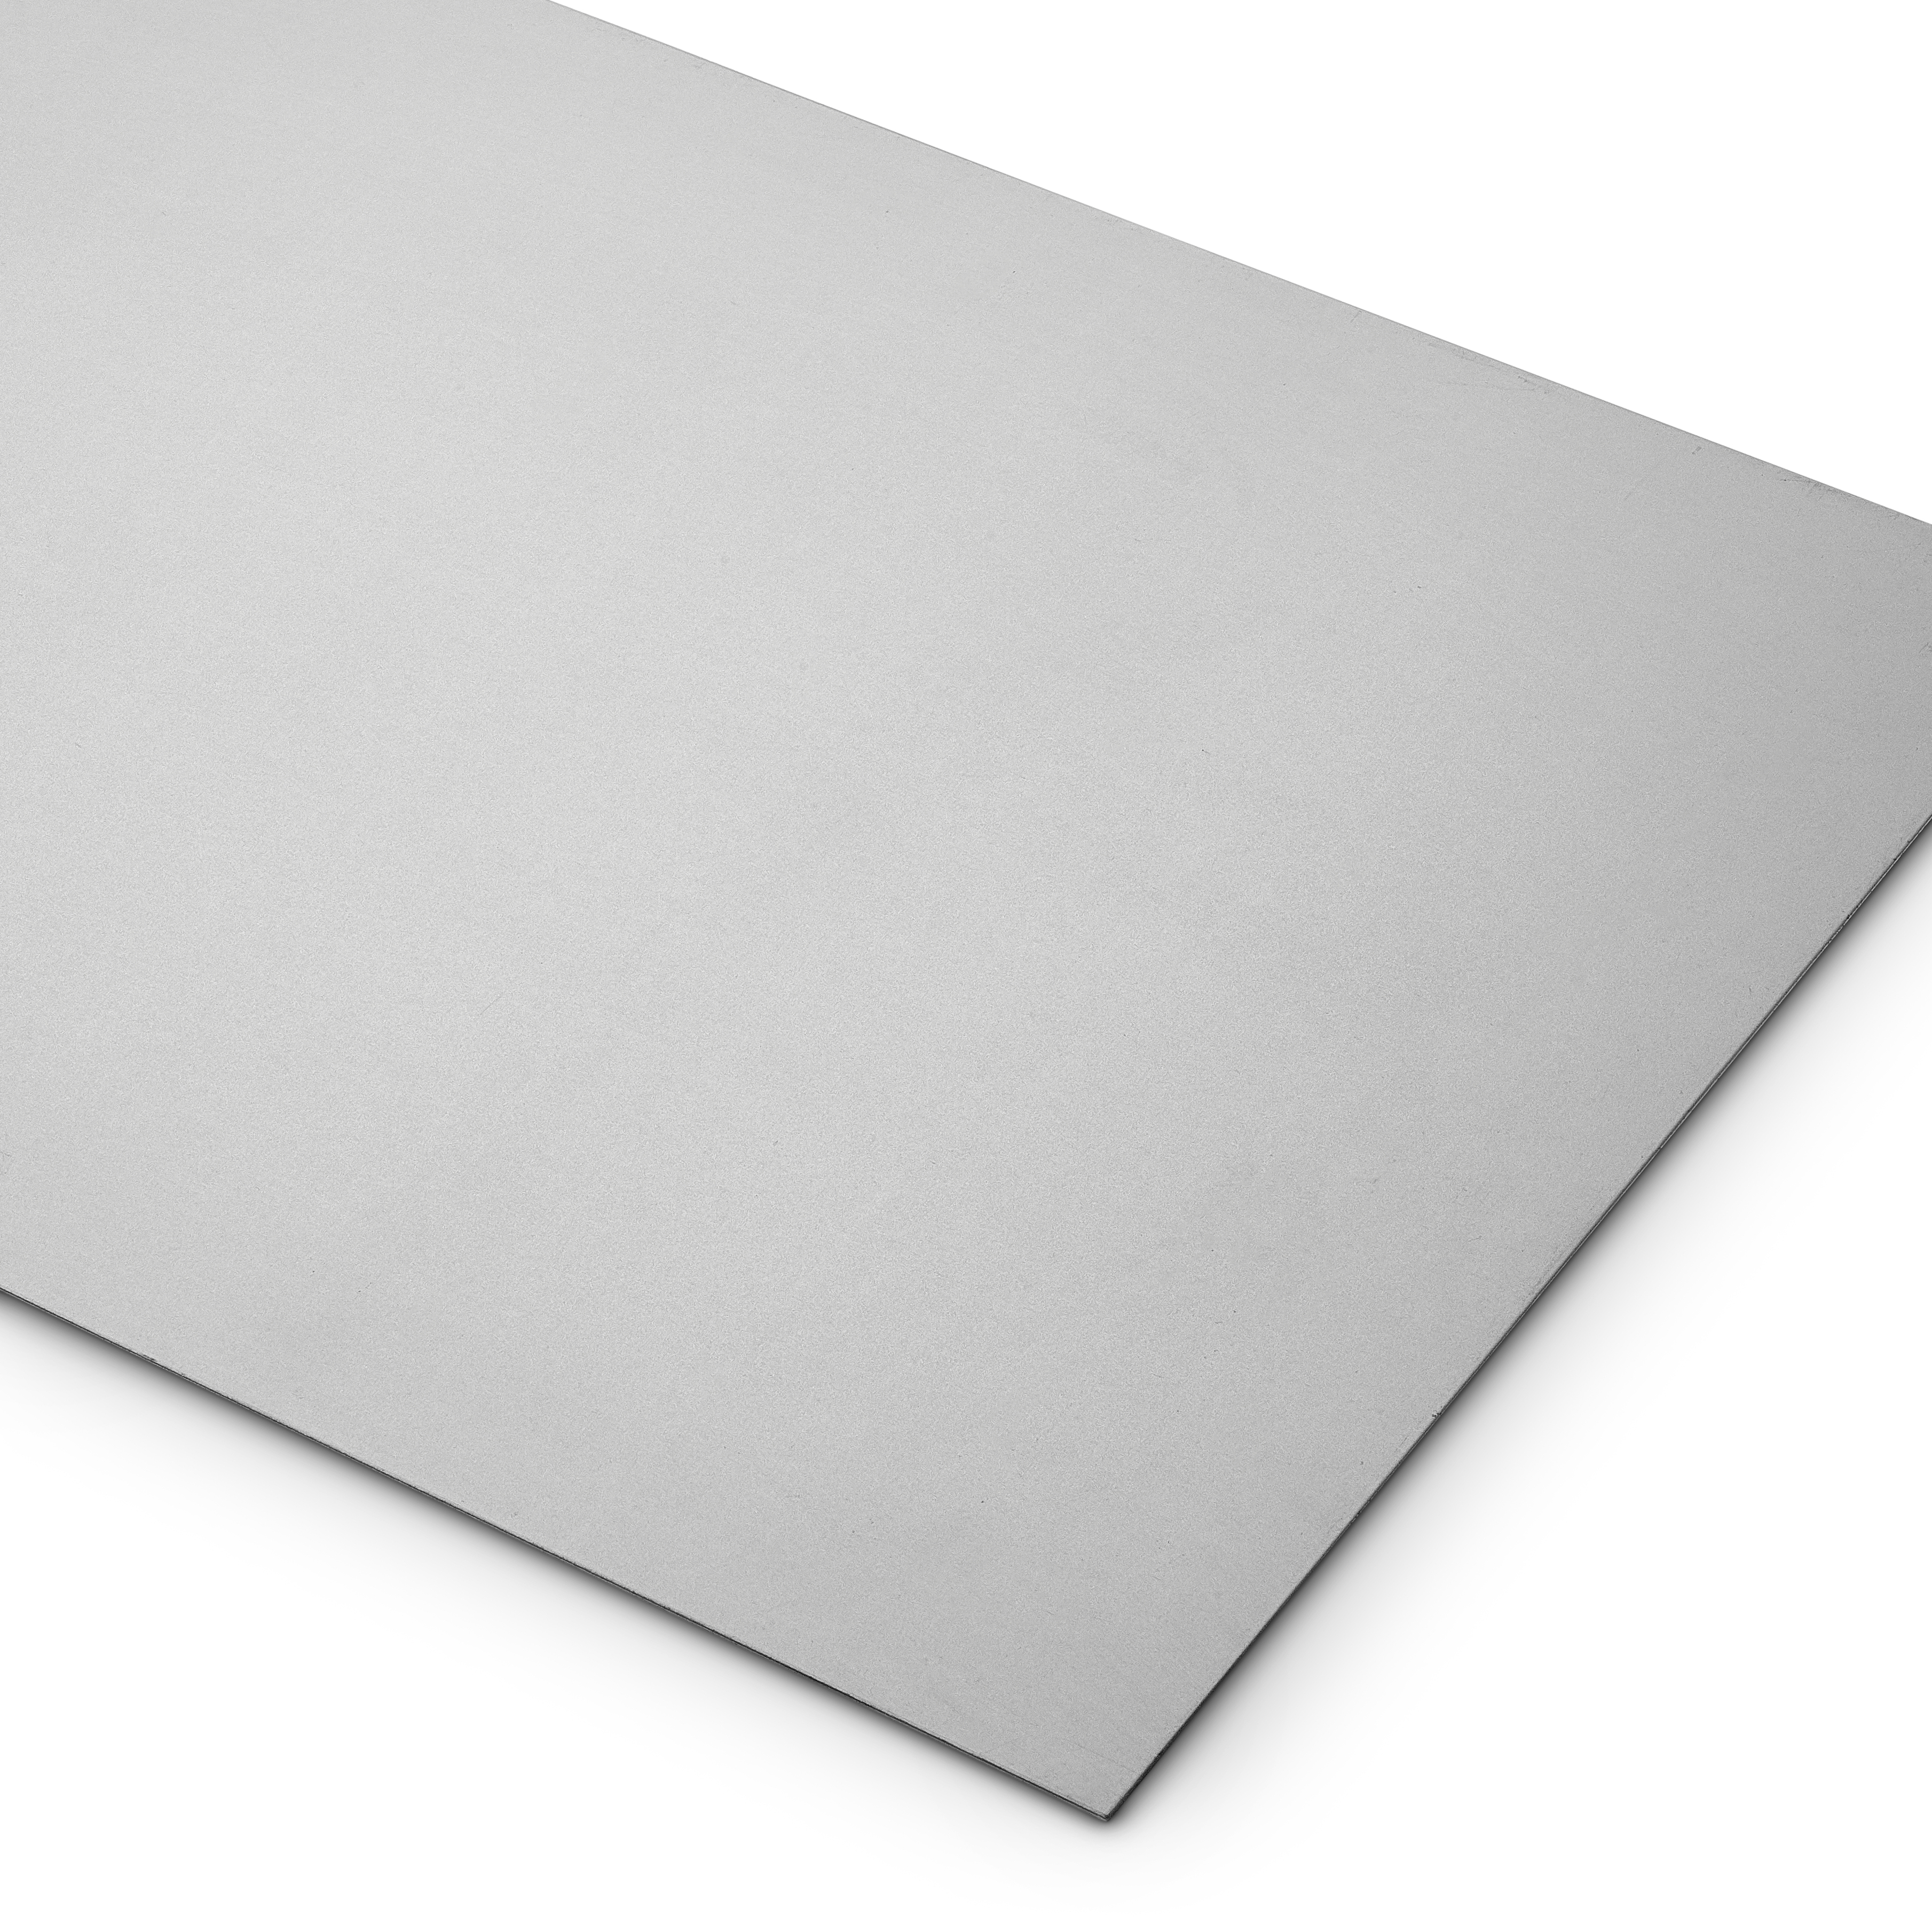 100 x 100mm 3mm Thick Mild Steel Plate Sheet Guillotine Cut 